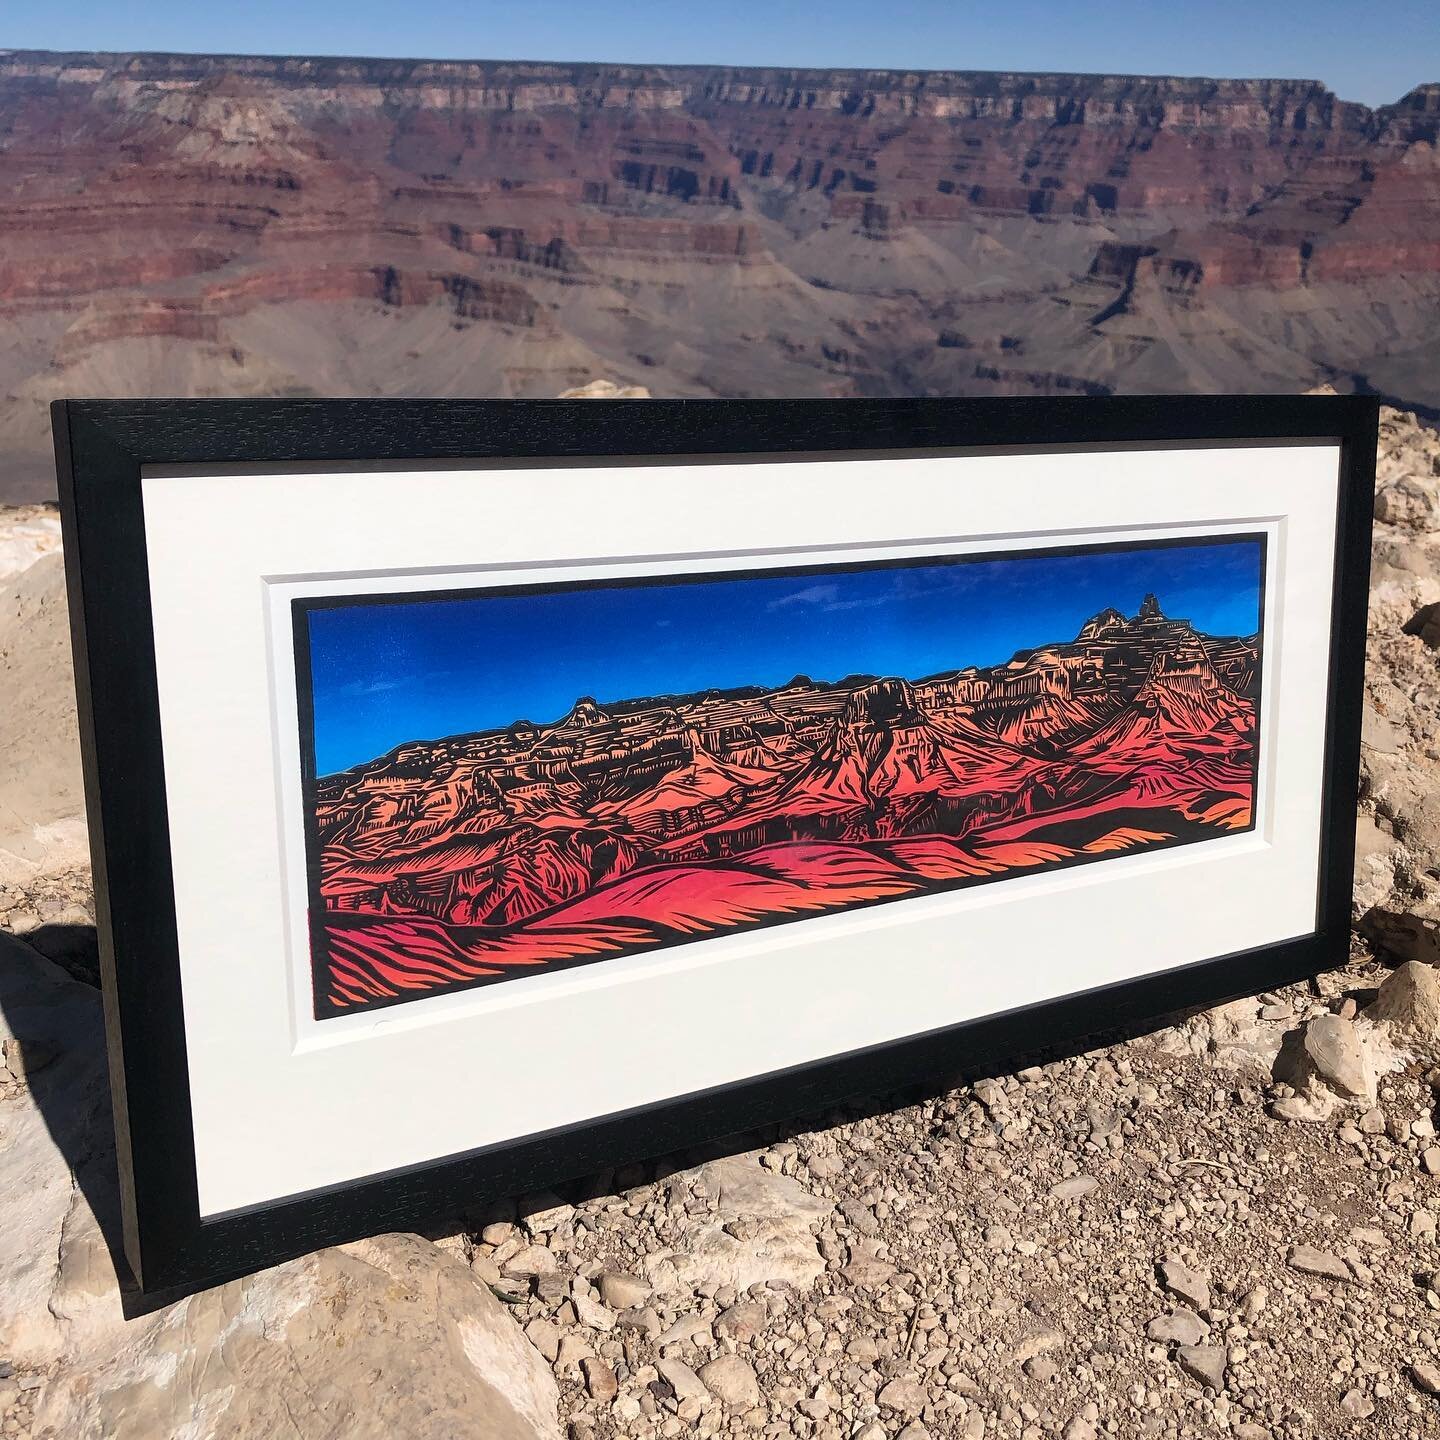 My Tip-off Panorama Frames came in and I took these beauties out for a photo shoot! They are no comparison to the real thing&hellip;but man they look good in that warm winter light!  What do you all think? #linocut #grandcanyonart #southkaibabtrail #